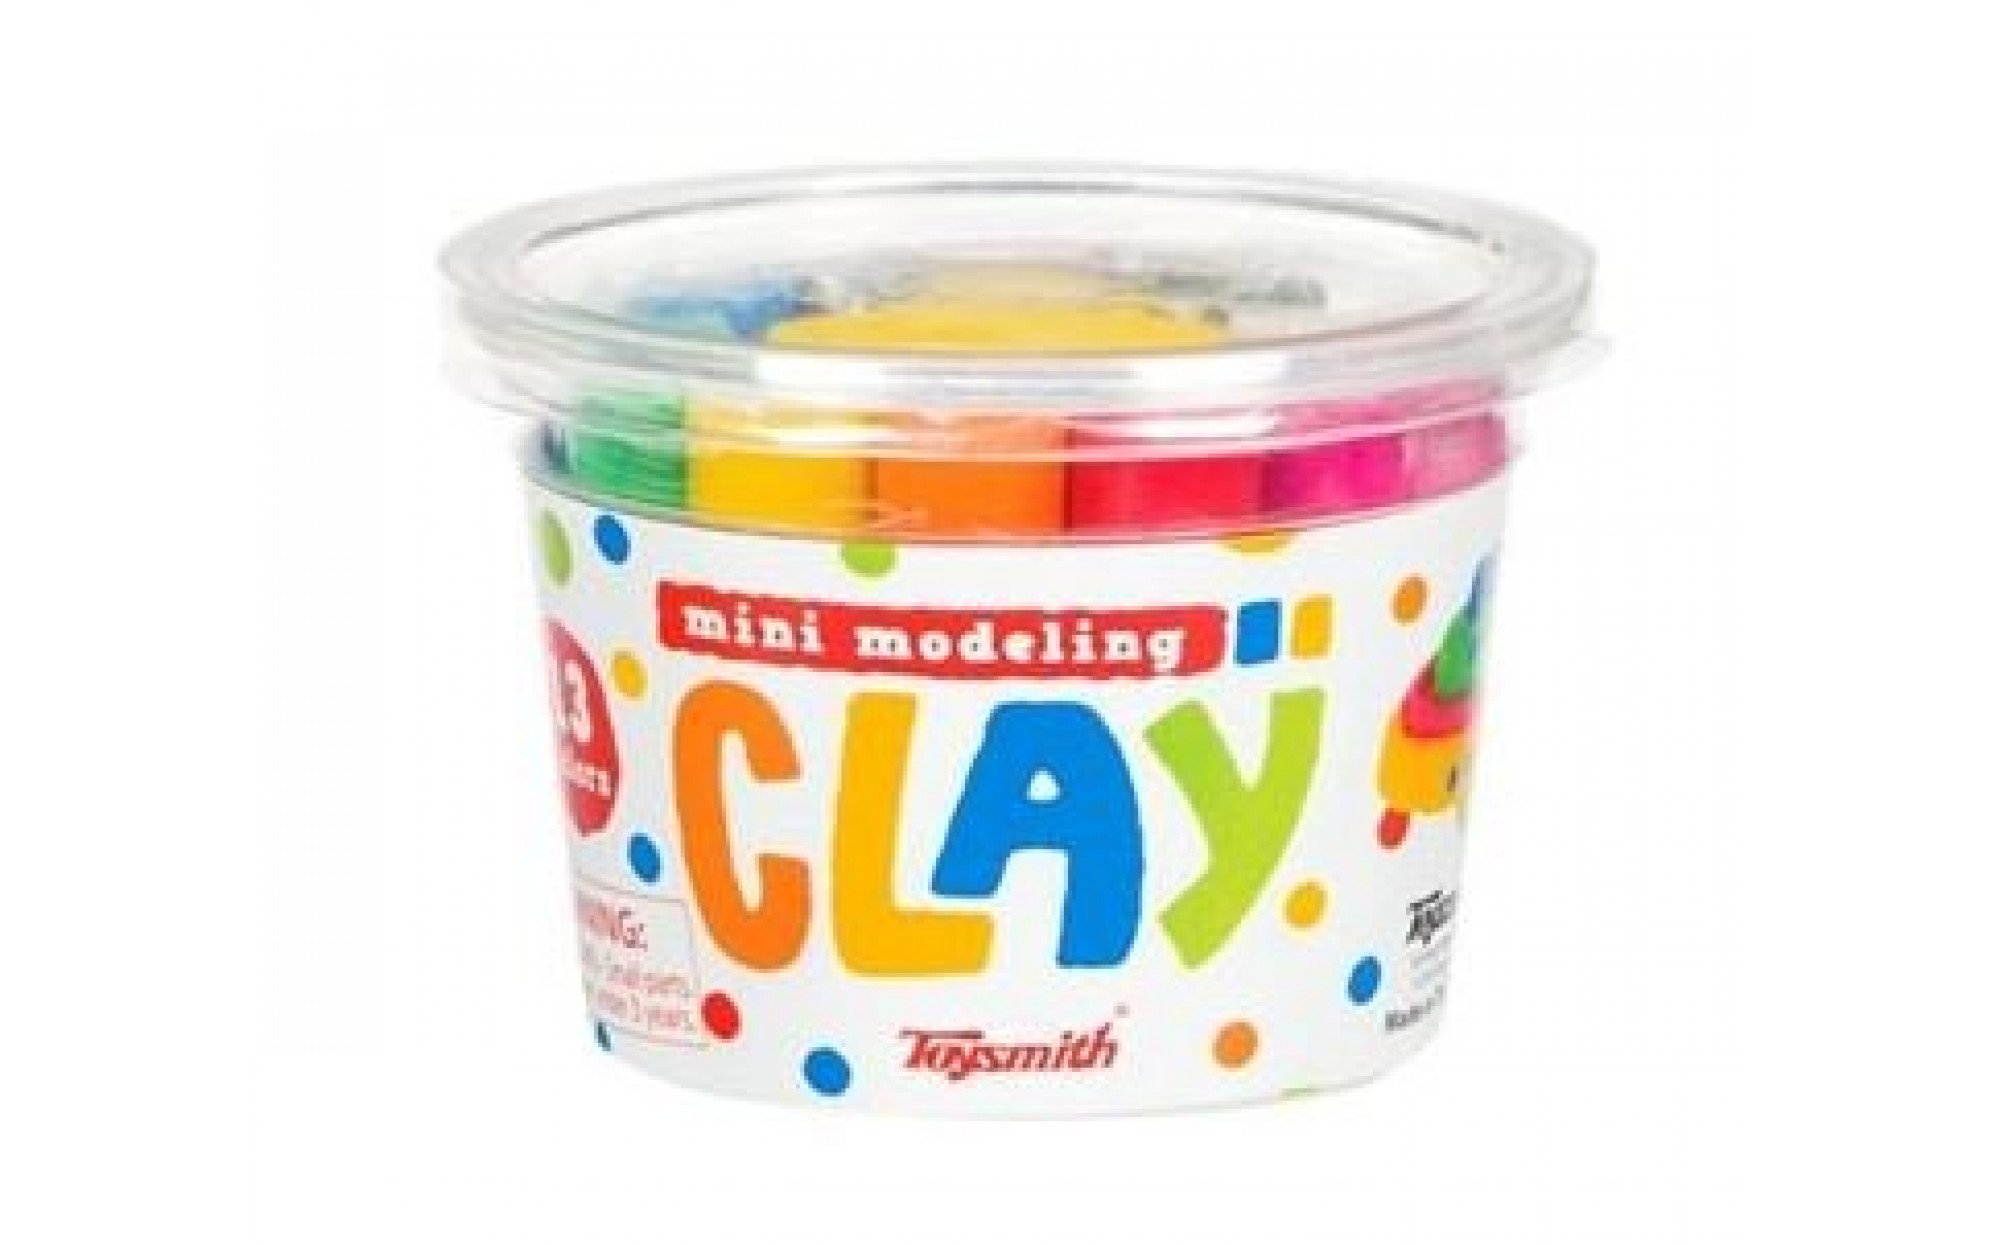 moldable clay